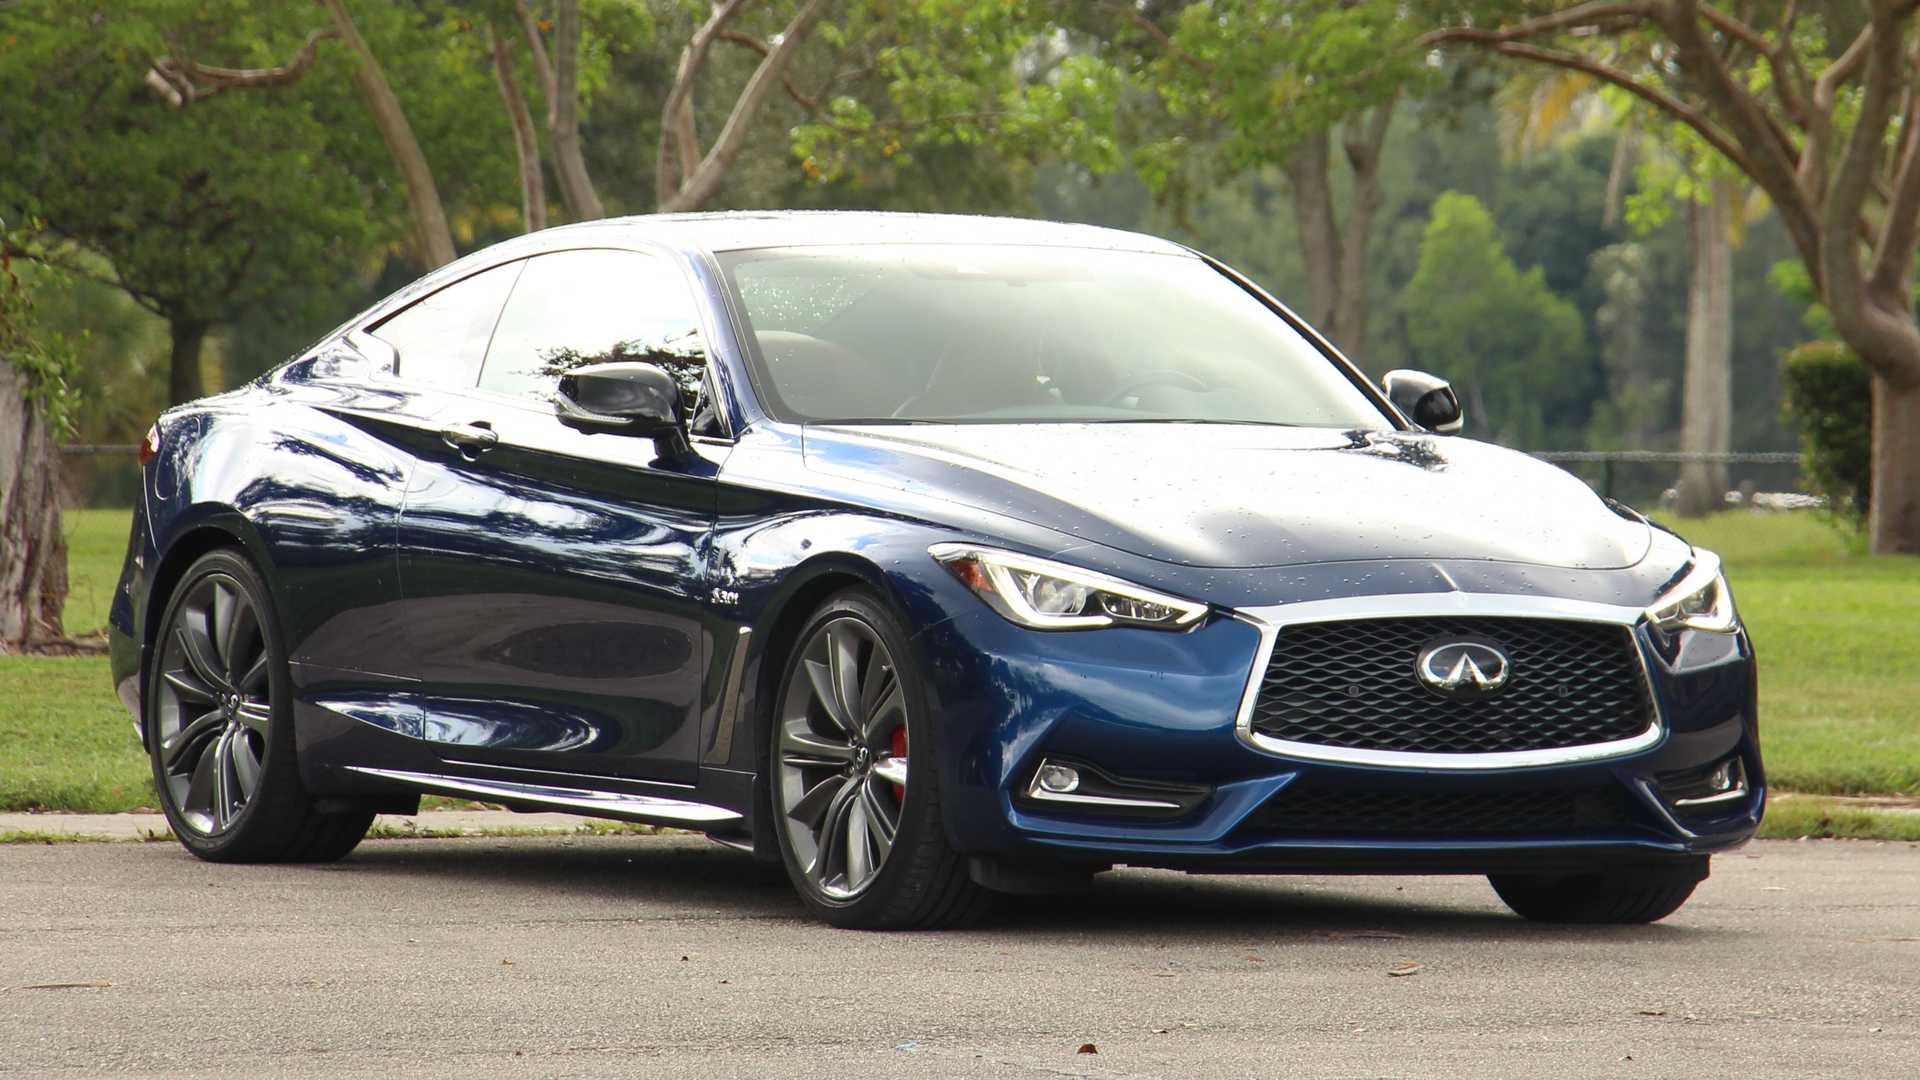 infiniti q60 production will end after 2022: report